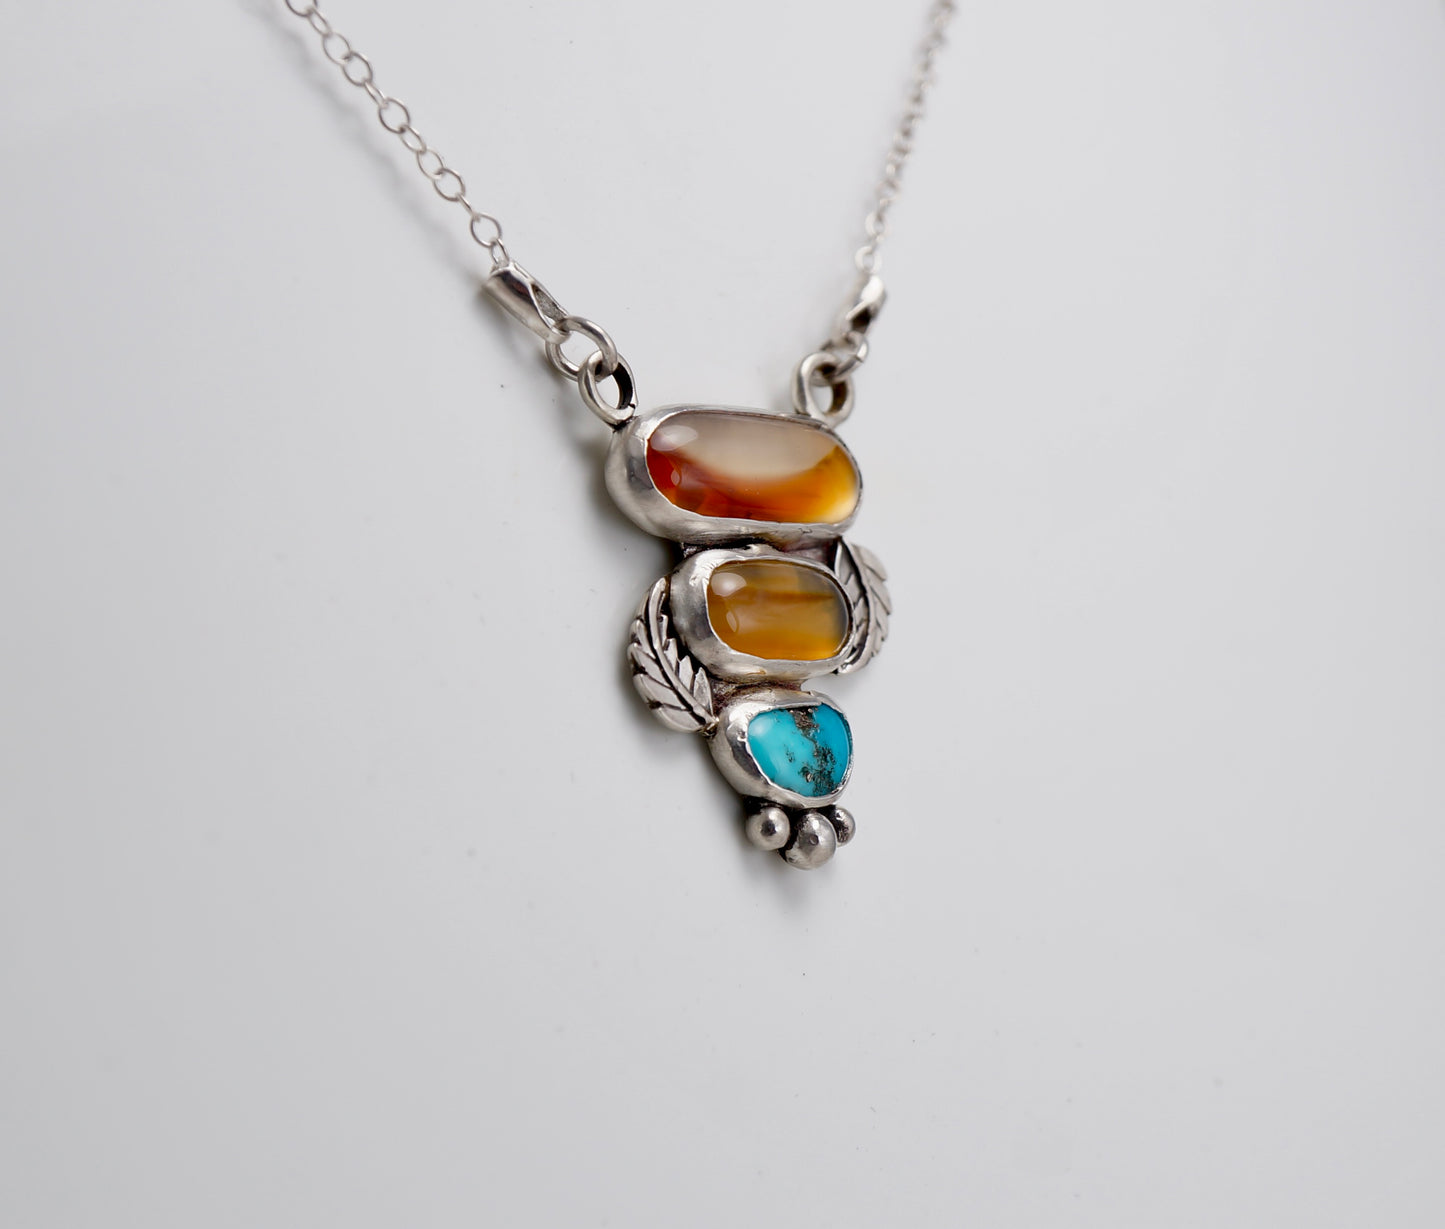 Montana Agate - Turquoise Necklace